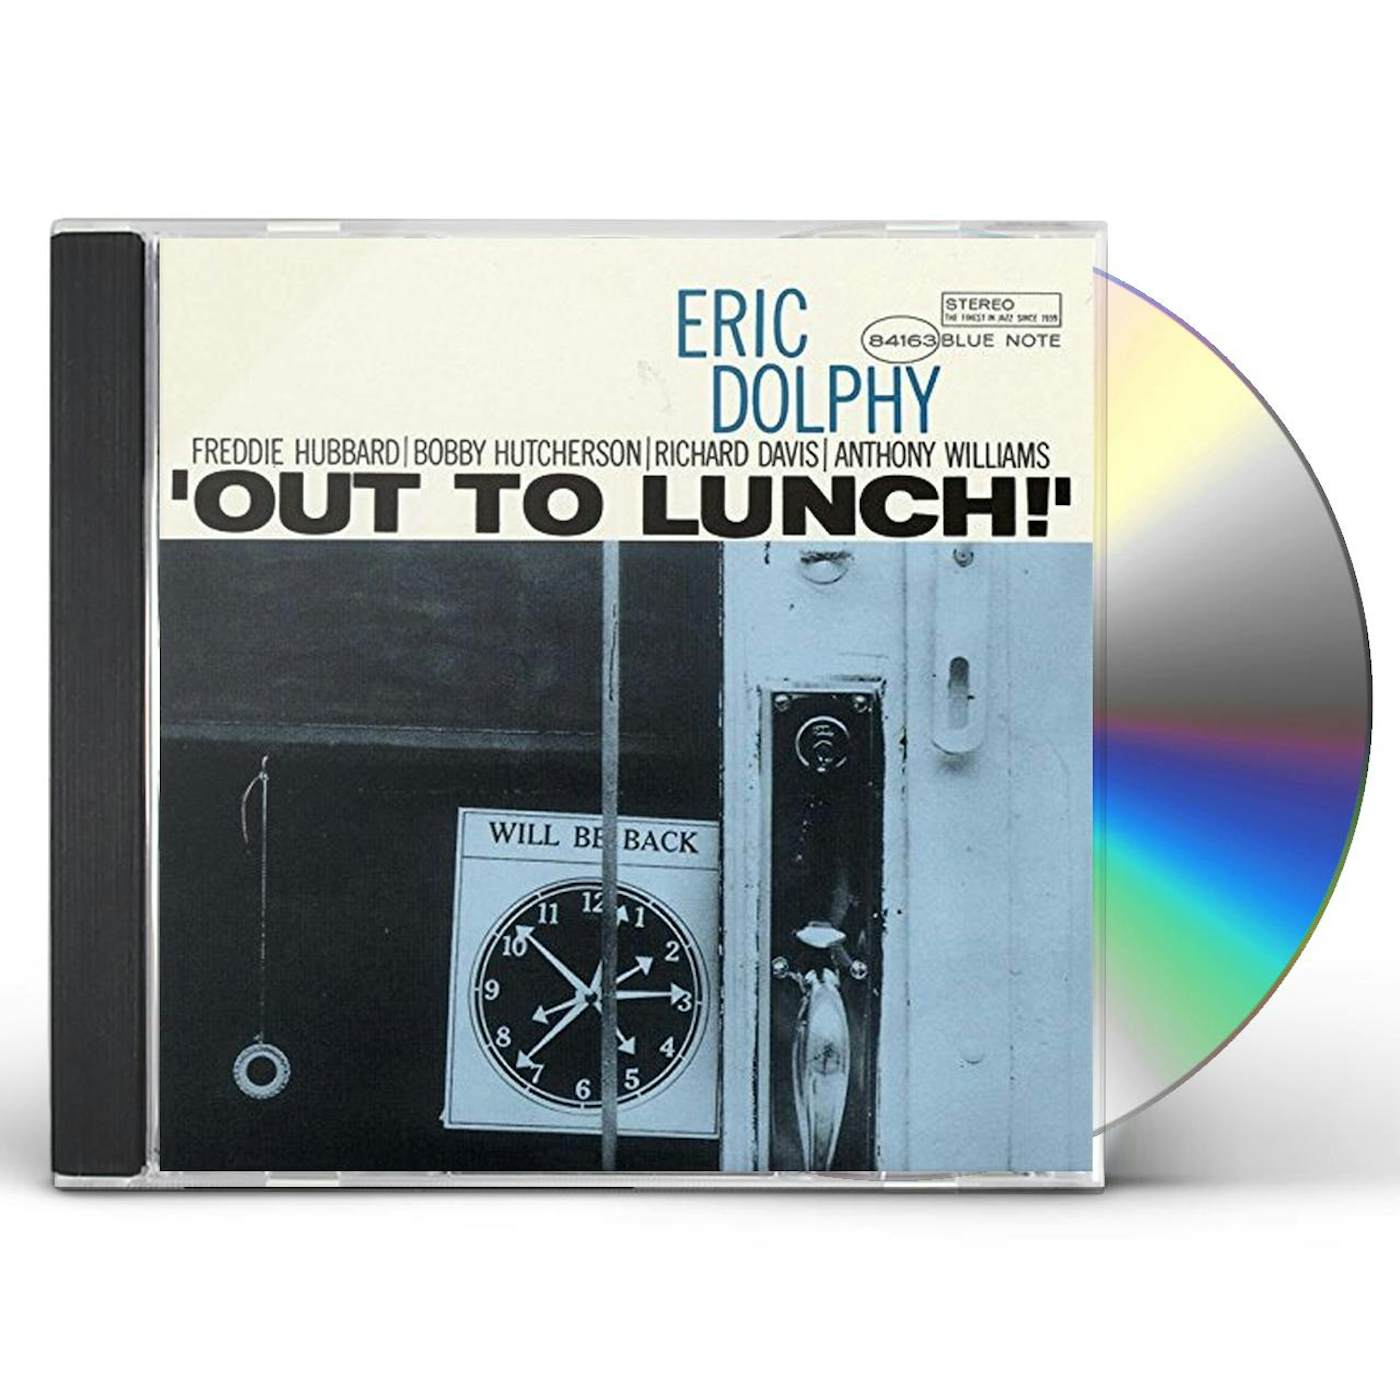 Eric Dolphy OUT TO LUNCH (SHM/BONUS TRACK) CD